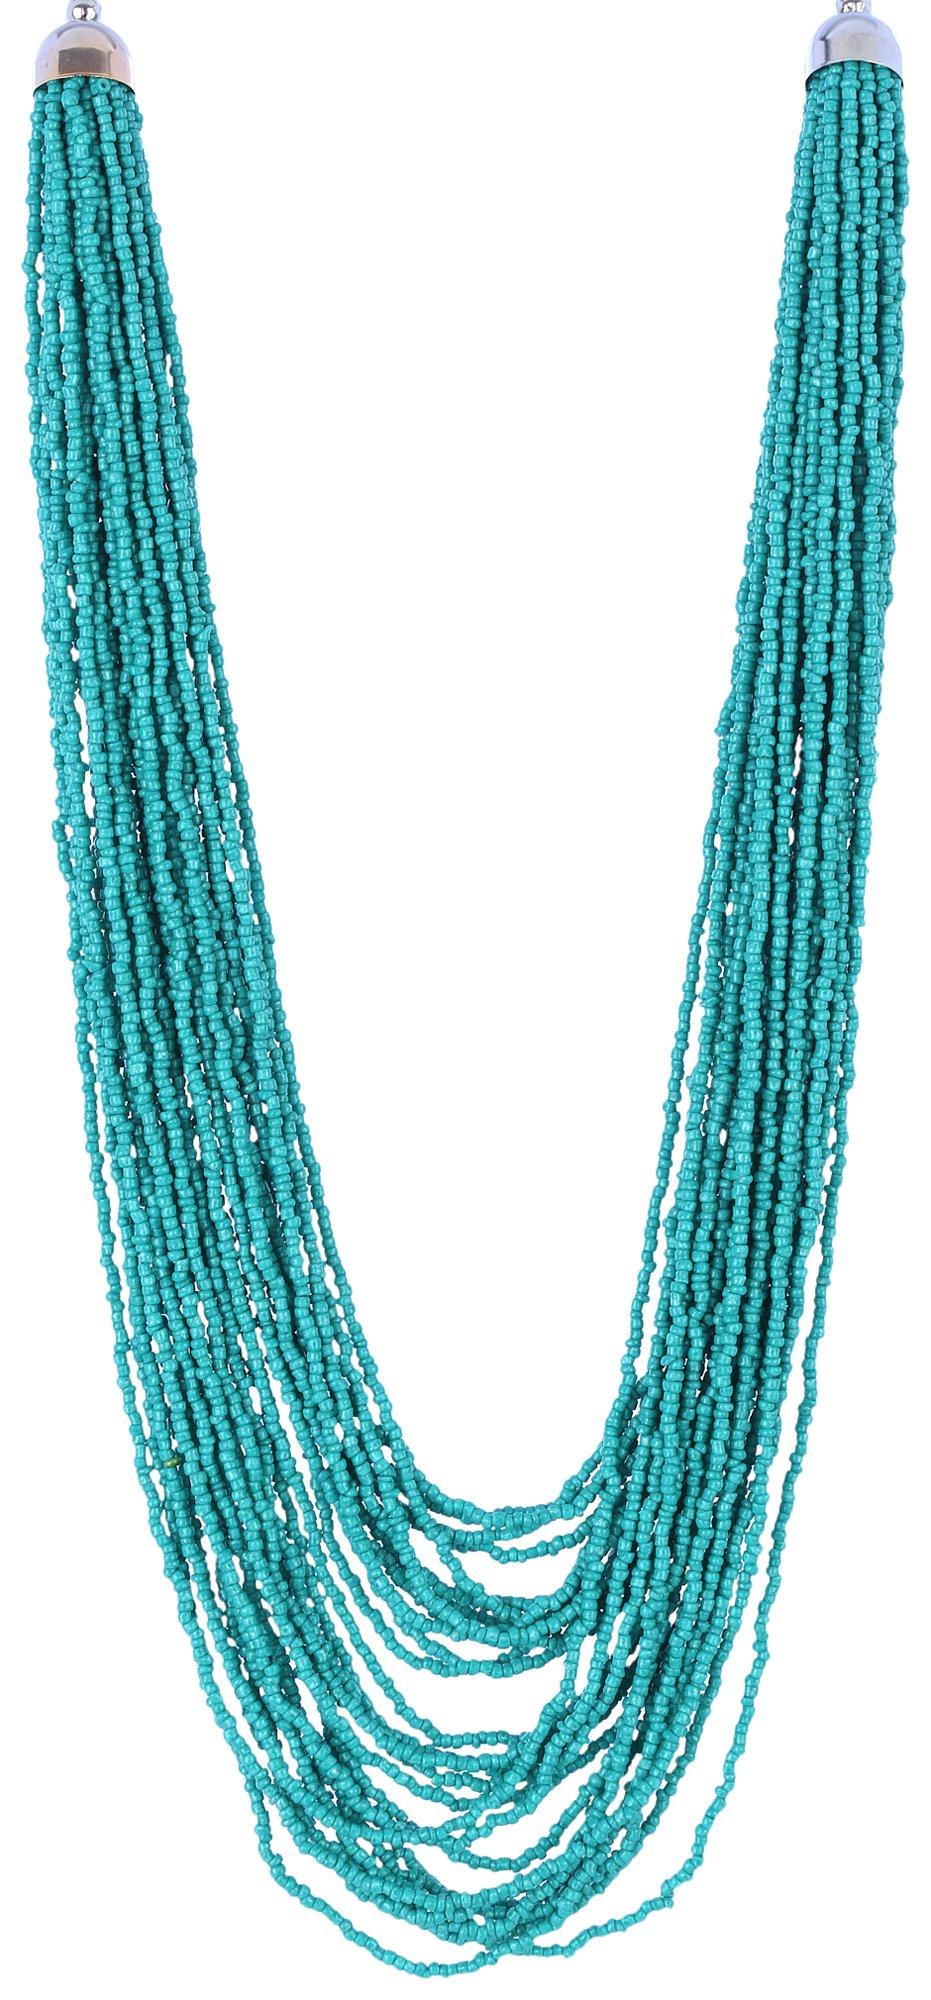 Multi-Row 16 In. Crochet Seed Bead Necklace